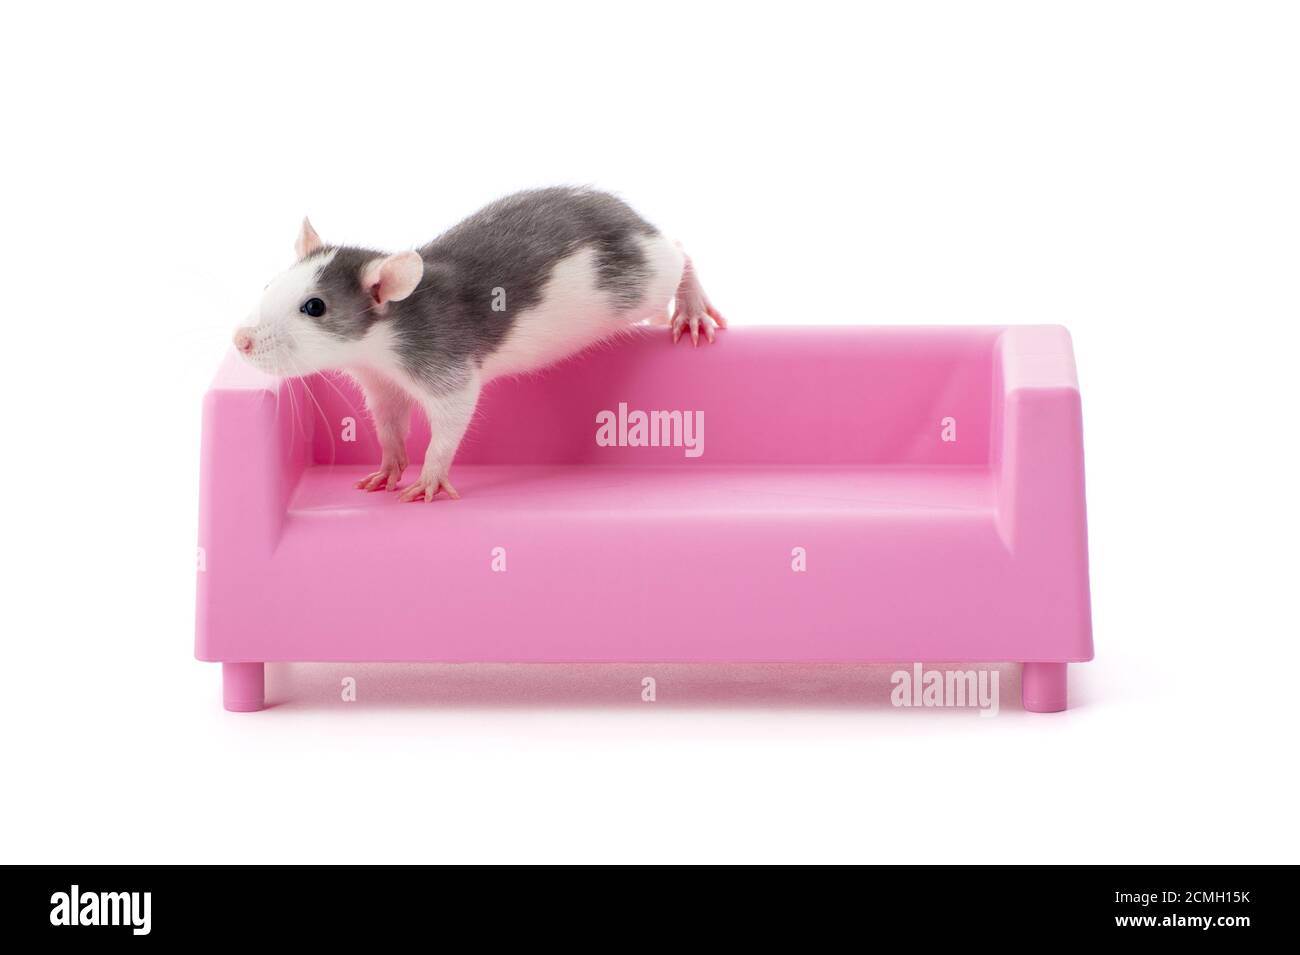 Cute young rat sitting on a toy pink couch. Stock Photo